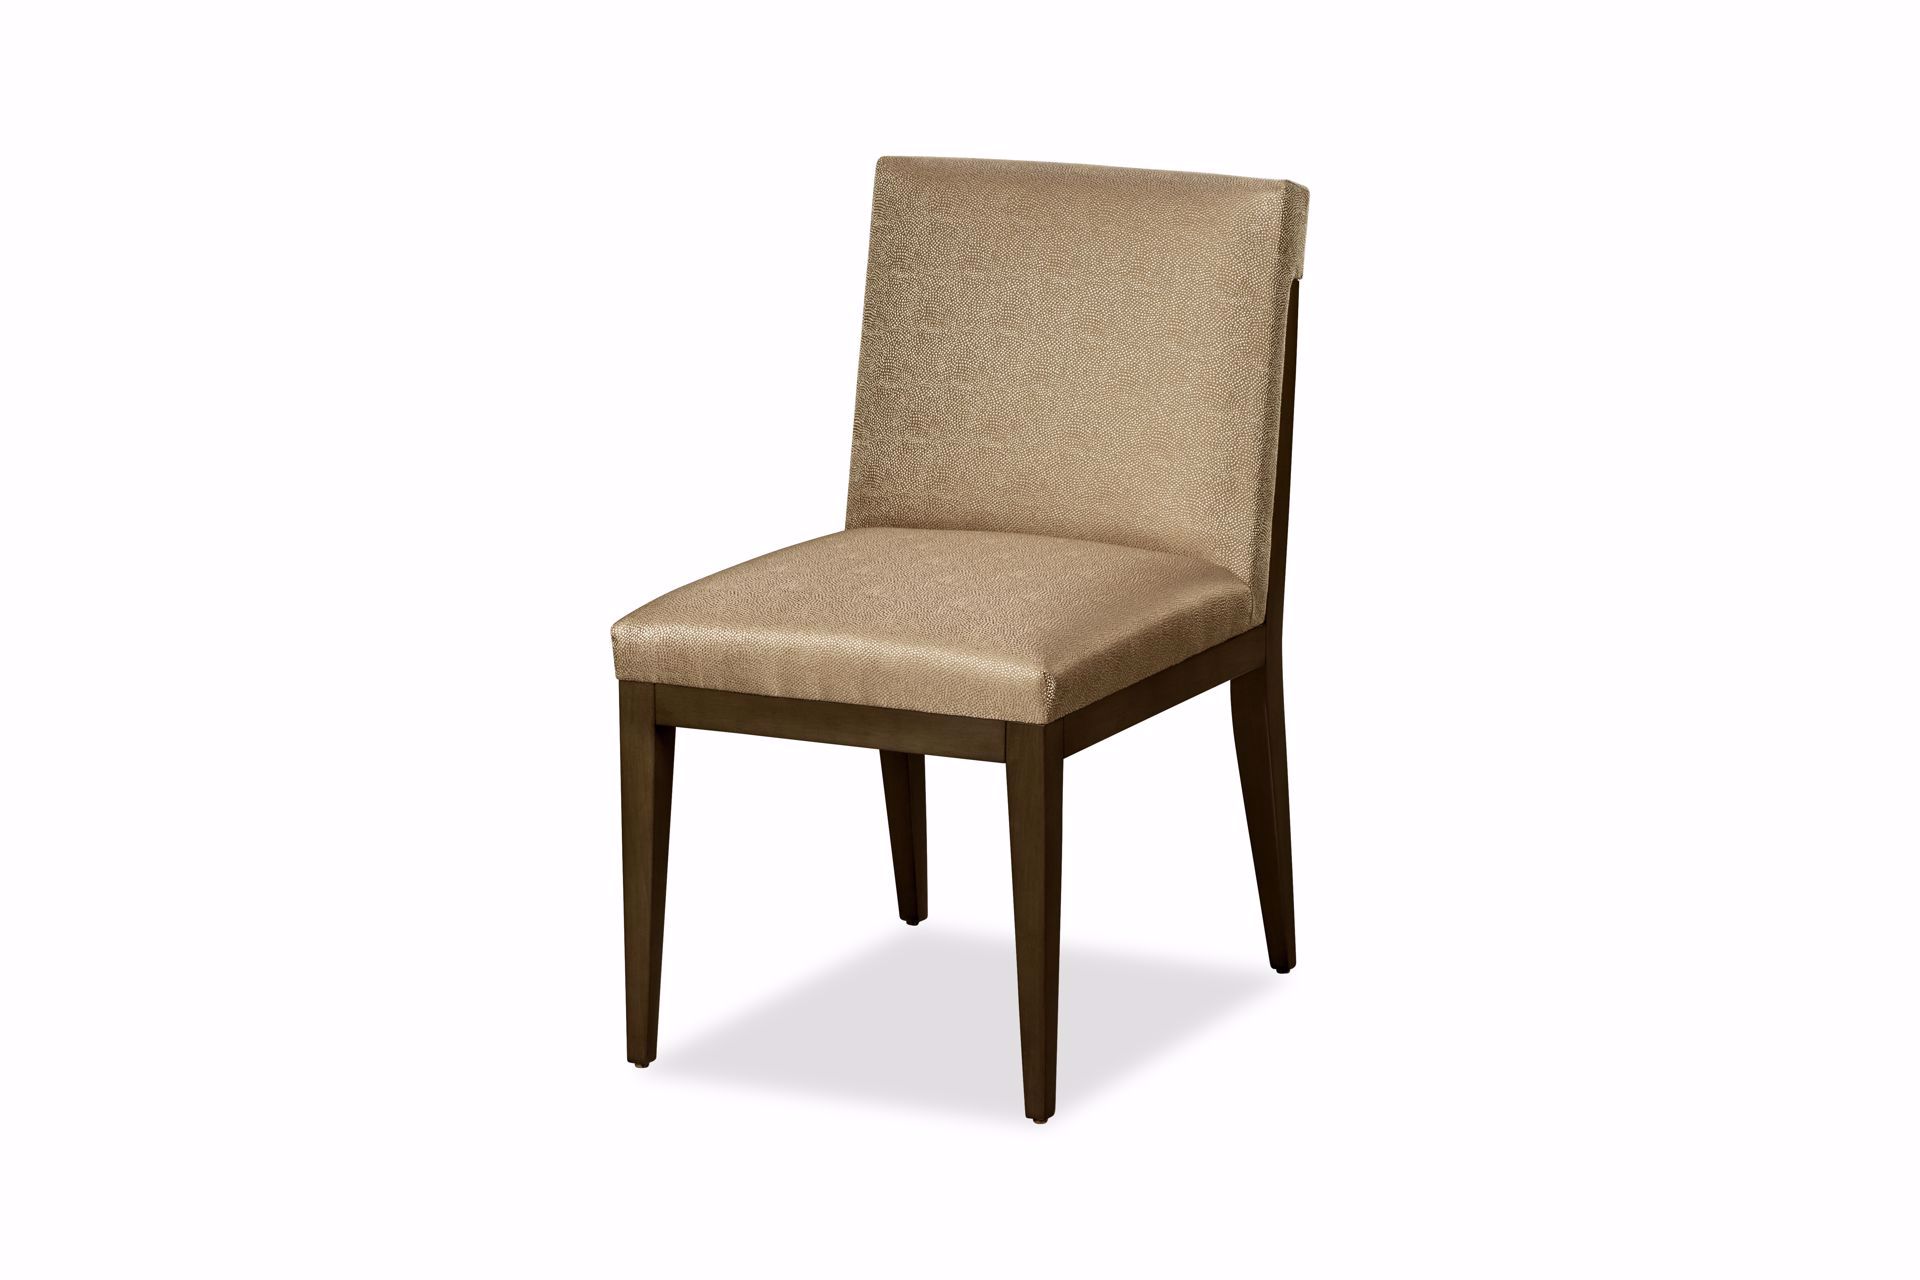 F143 DC20 BENNET DINING CHAIR